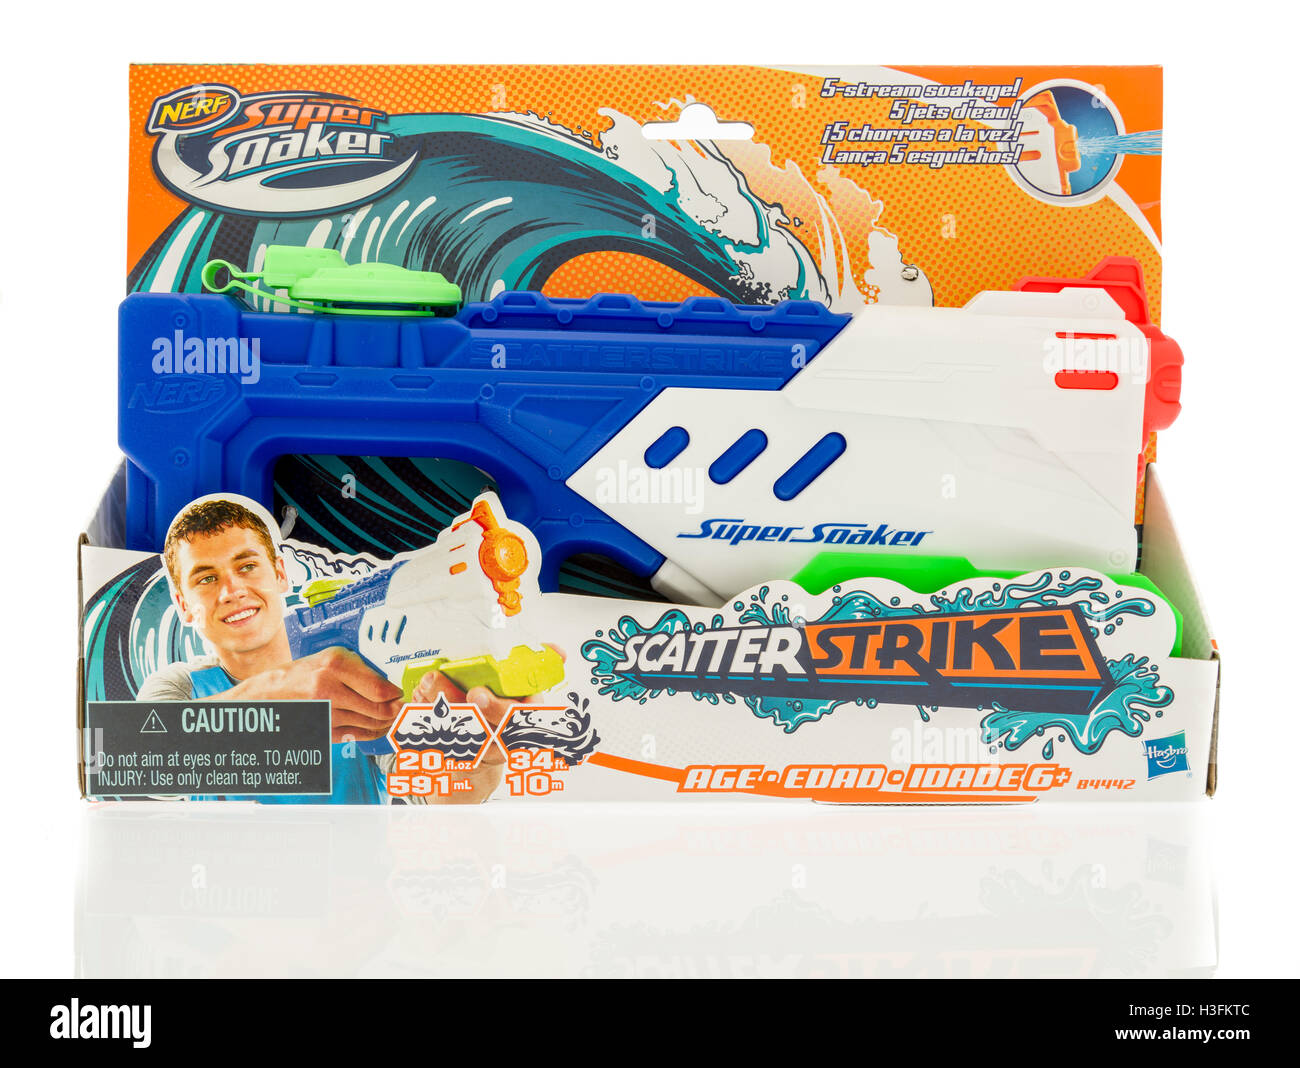 Winneconne, WI - 7 October 2016:  Package of a Nerf super soaker on an isolated background. Stock Photo